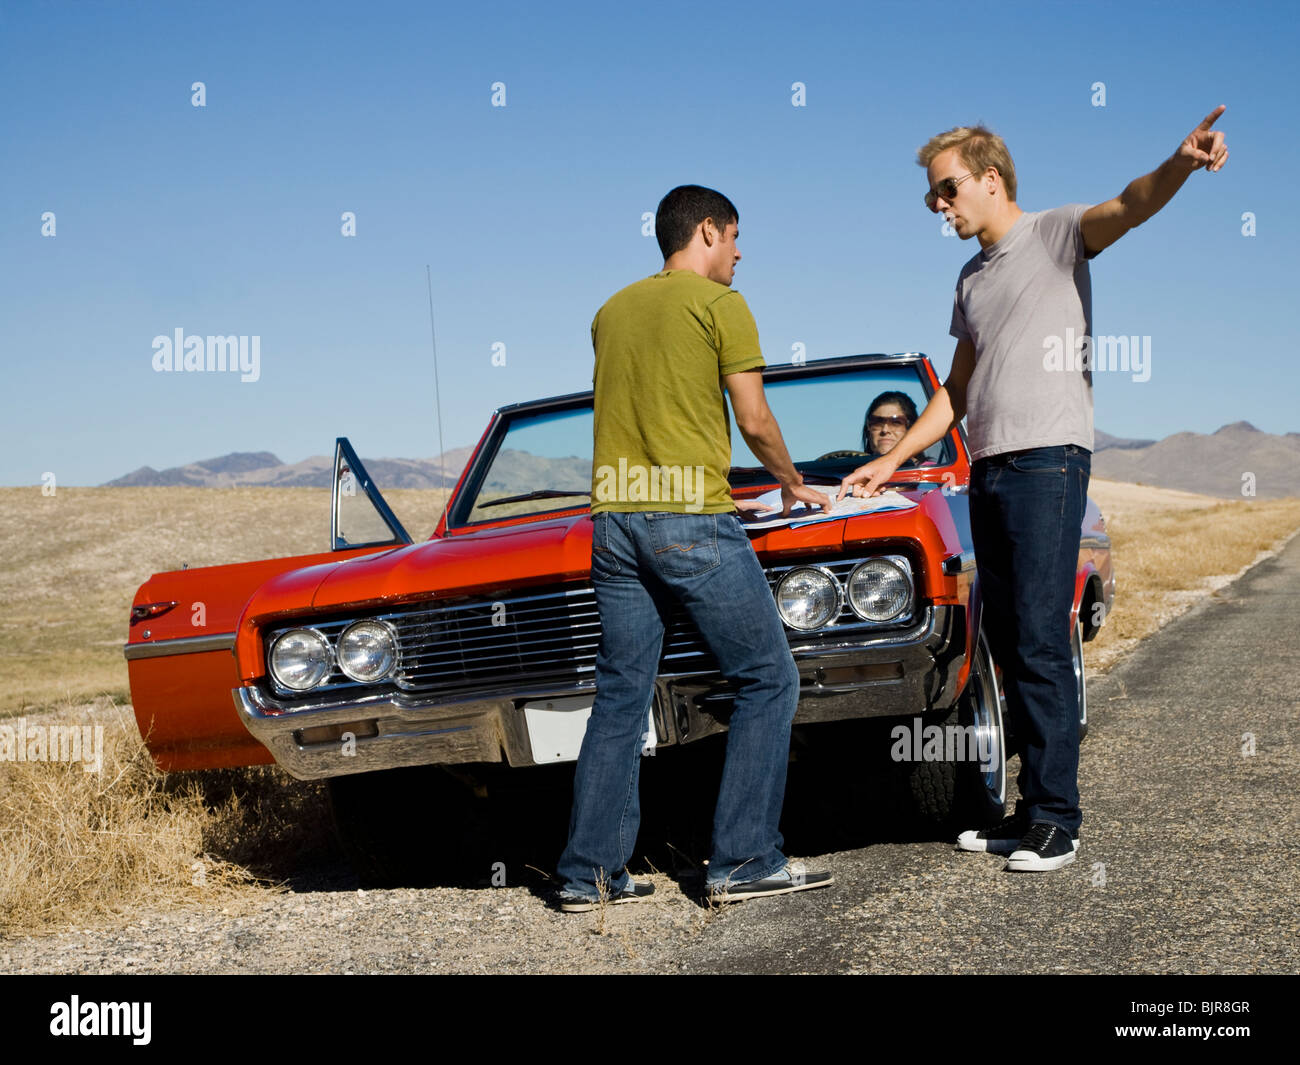 lost on a road trip Stock Photo